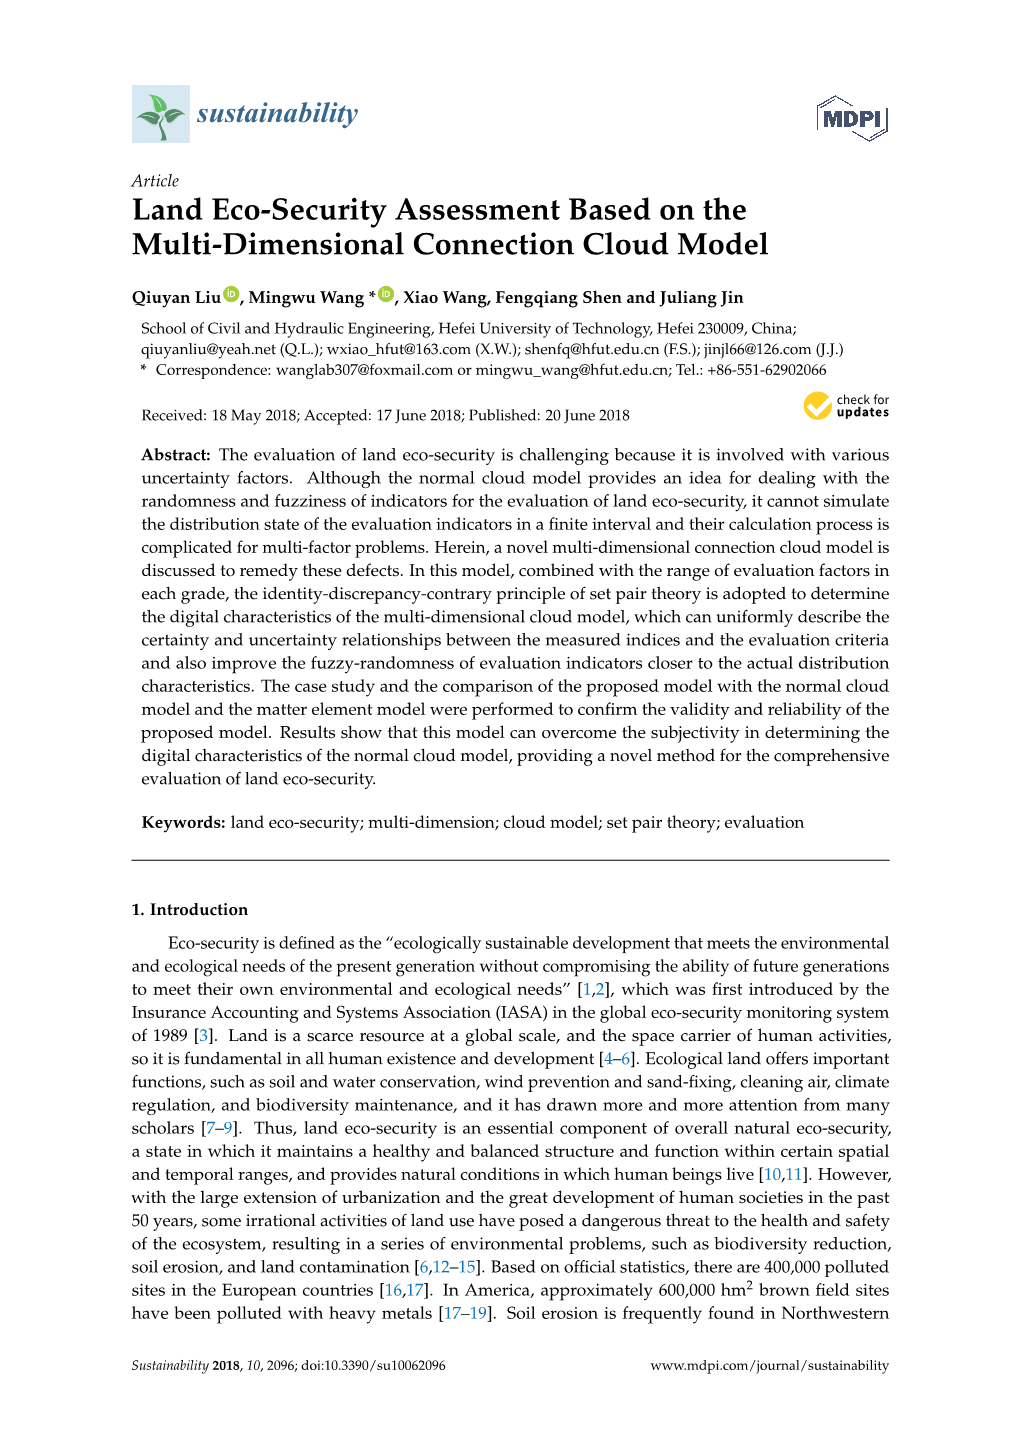 Land Eco-Security Assessment Based on the Multi-Dimensional Connection Cloud Model